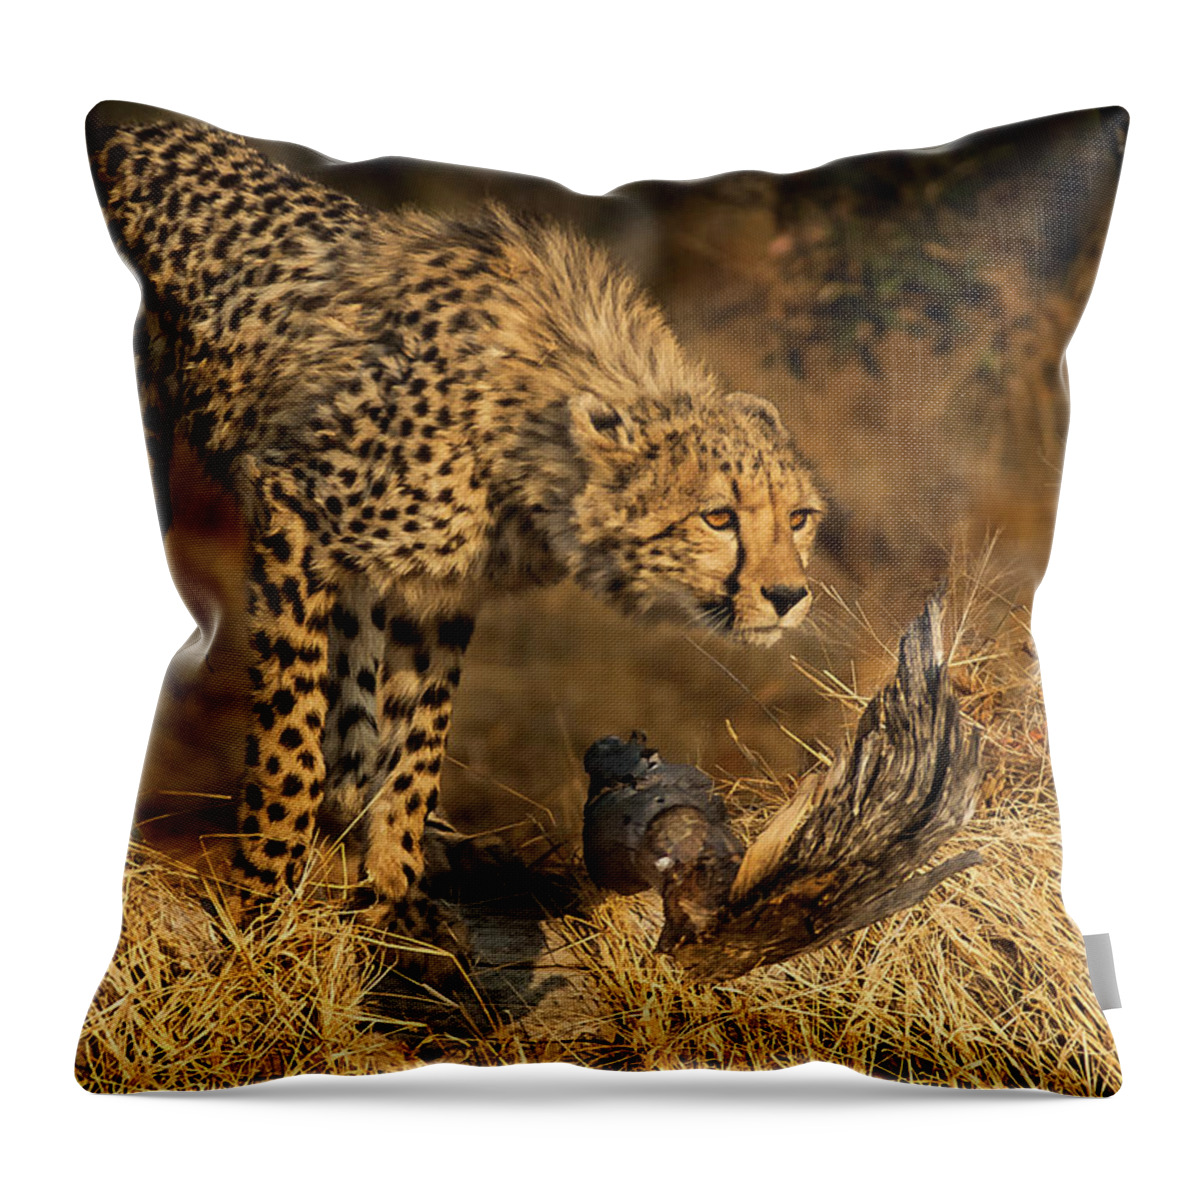 Cheetah Throw Pillow featuring the photograph The Lookout by Linda Villers